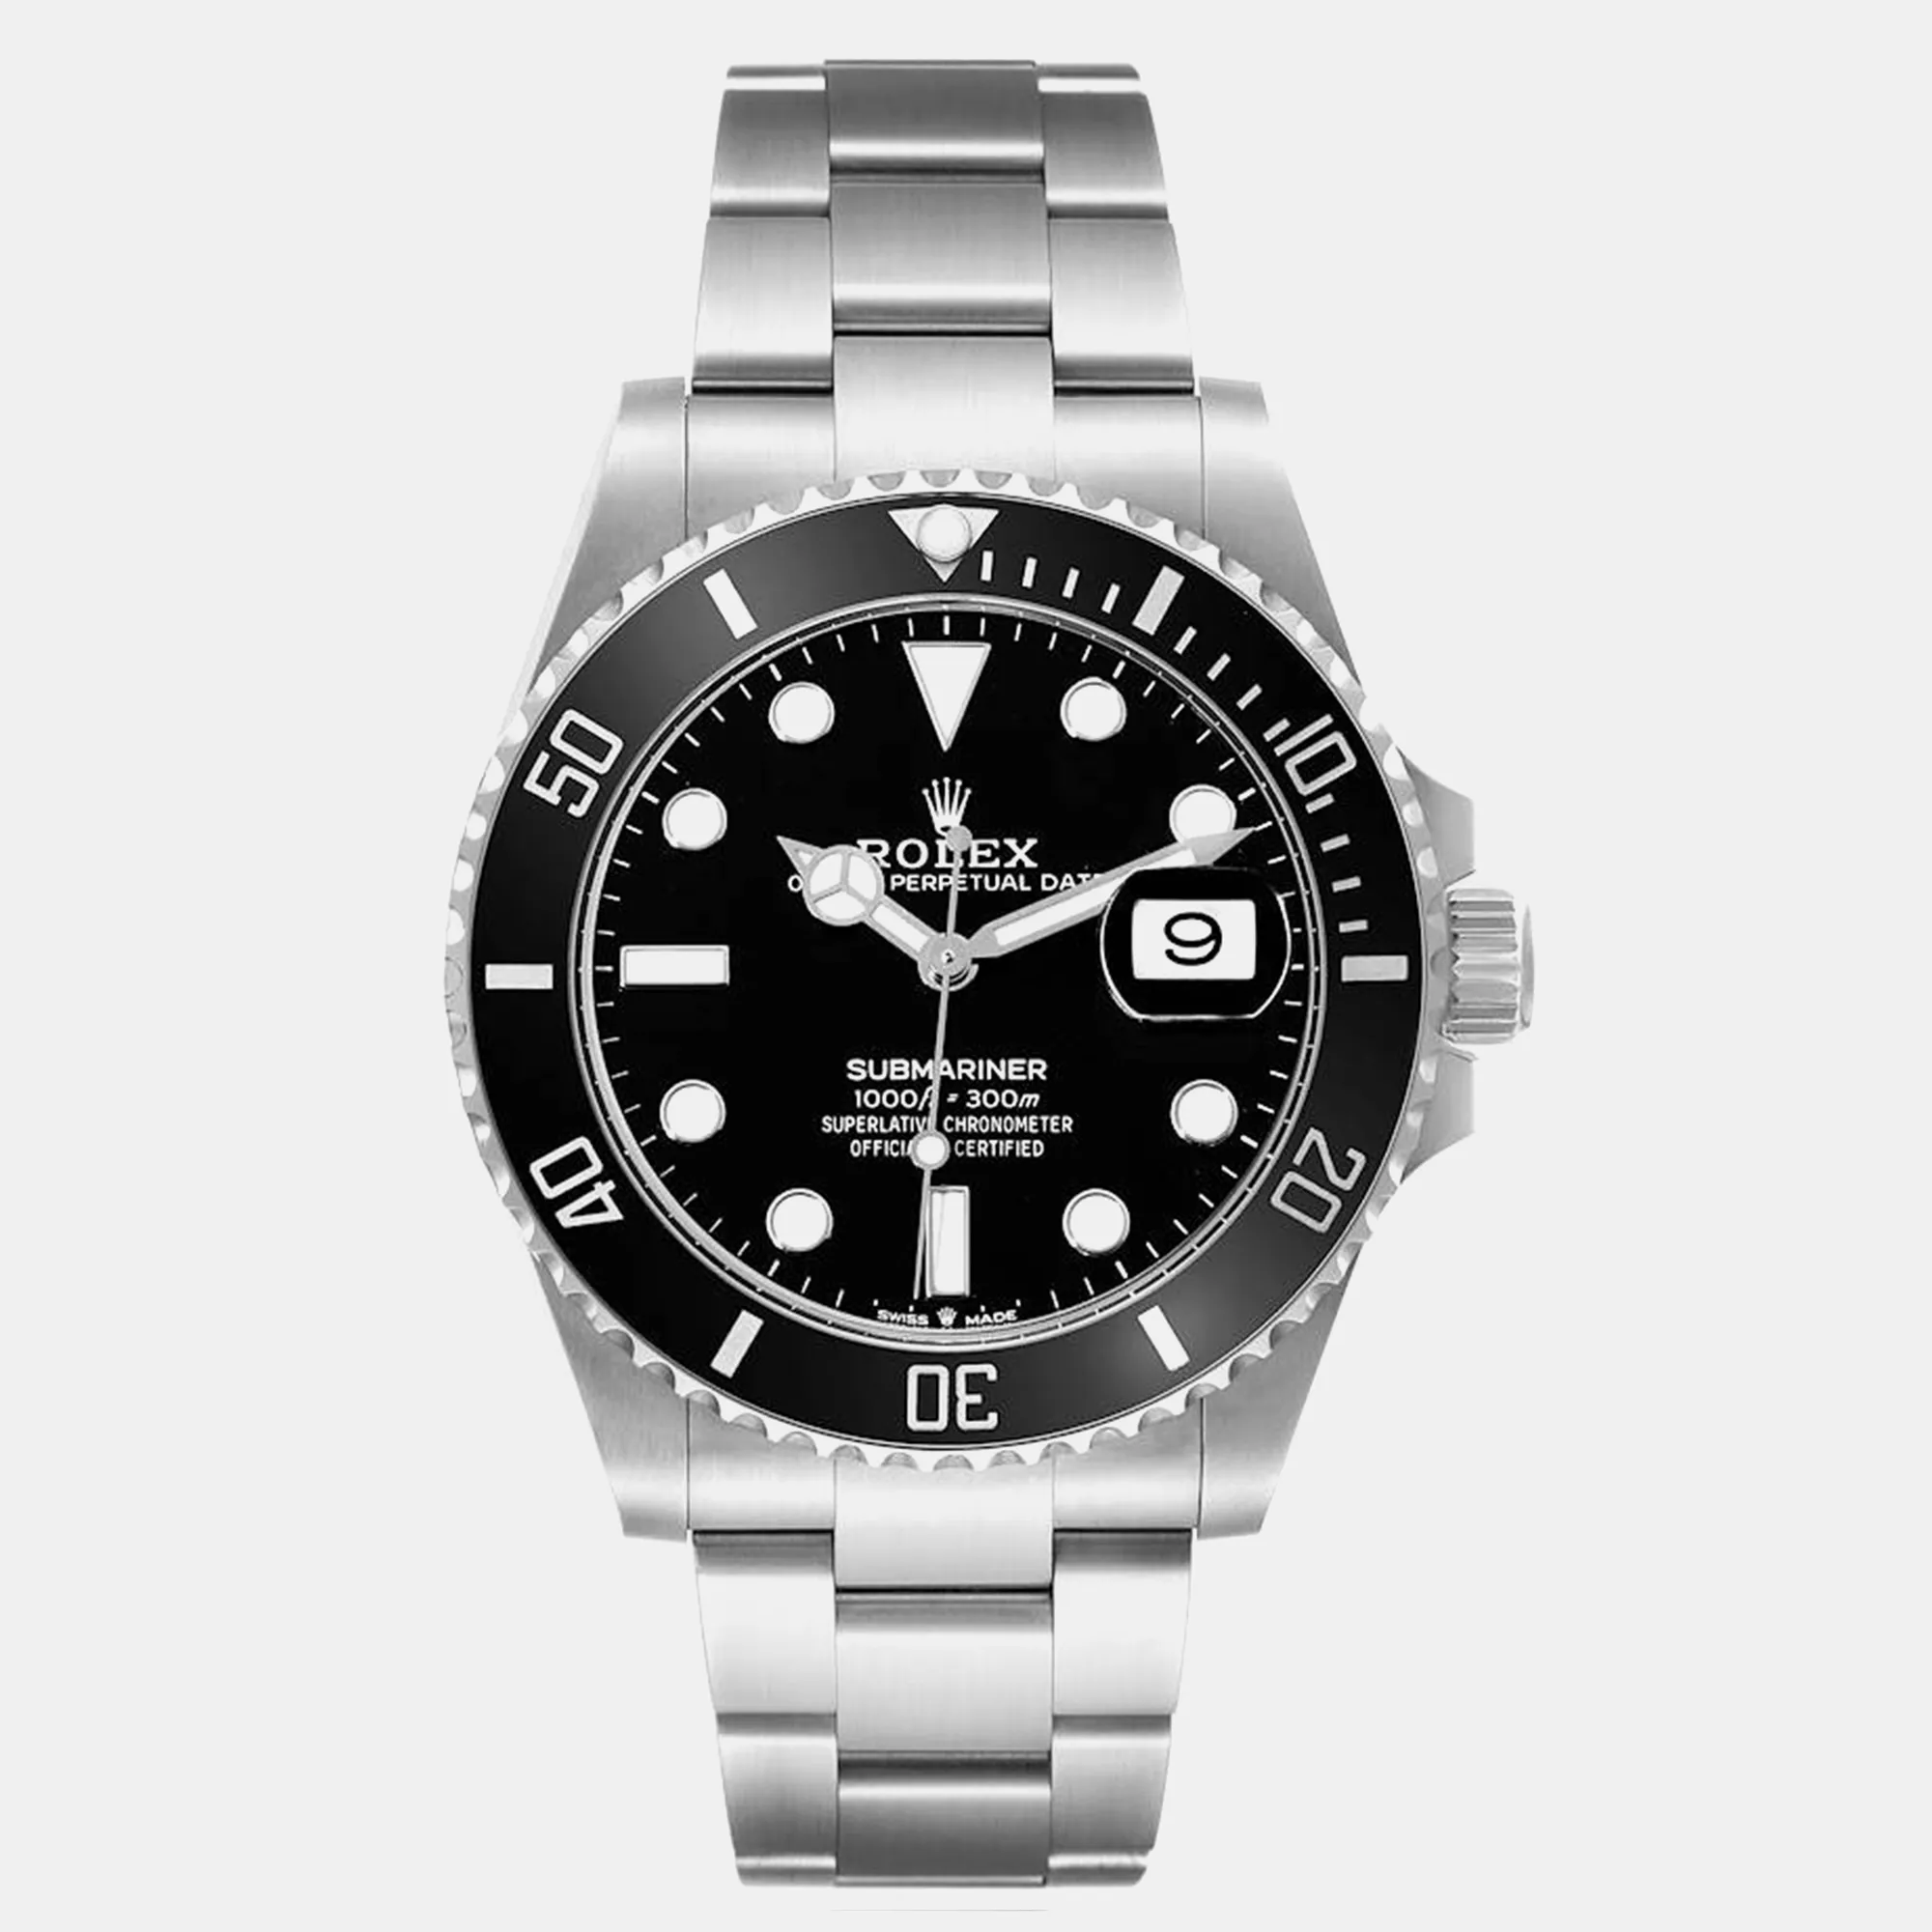 Rolex Submariner 41mm Stainless steel and ceramic